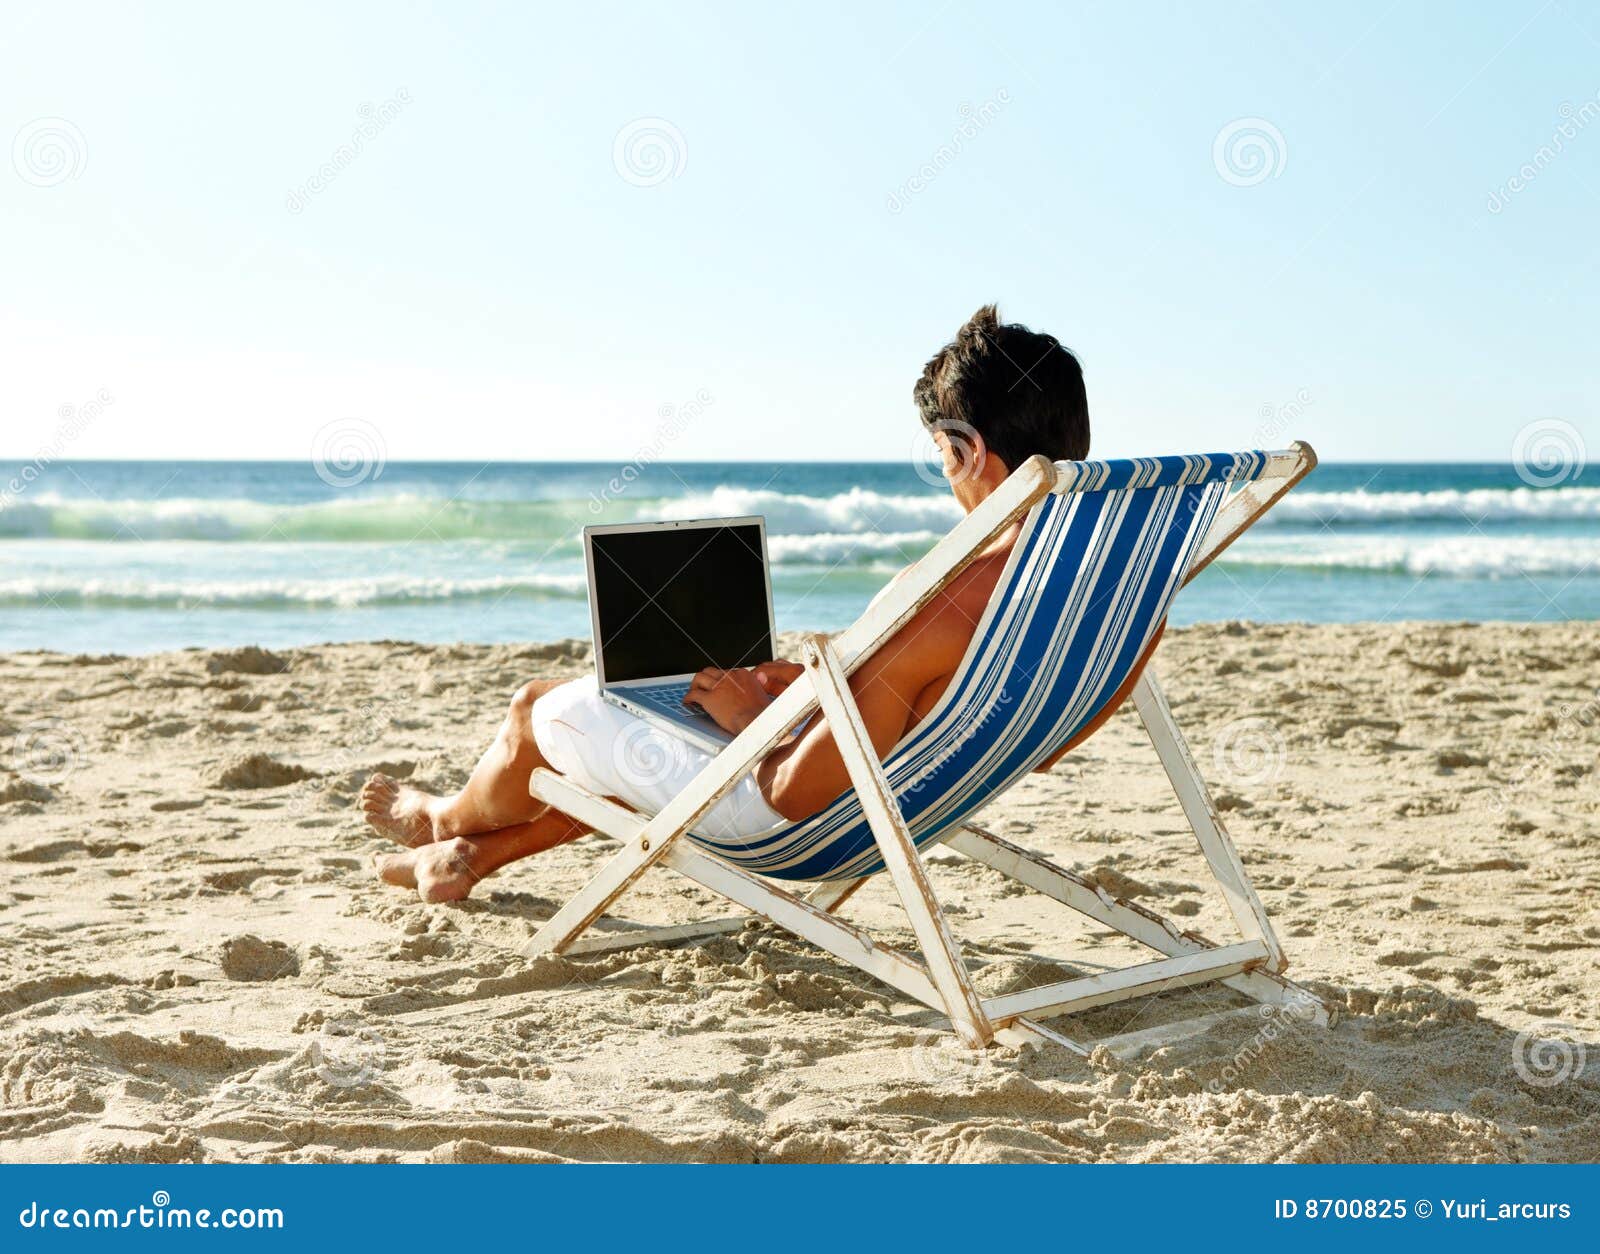 Man Relaxing on Deck Chair and Working on Laptop Stock Image - Image of ...